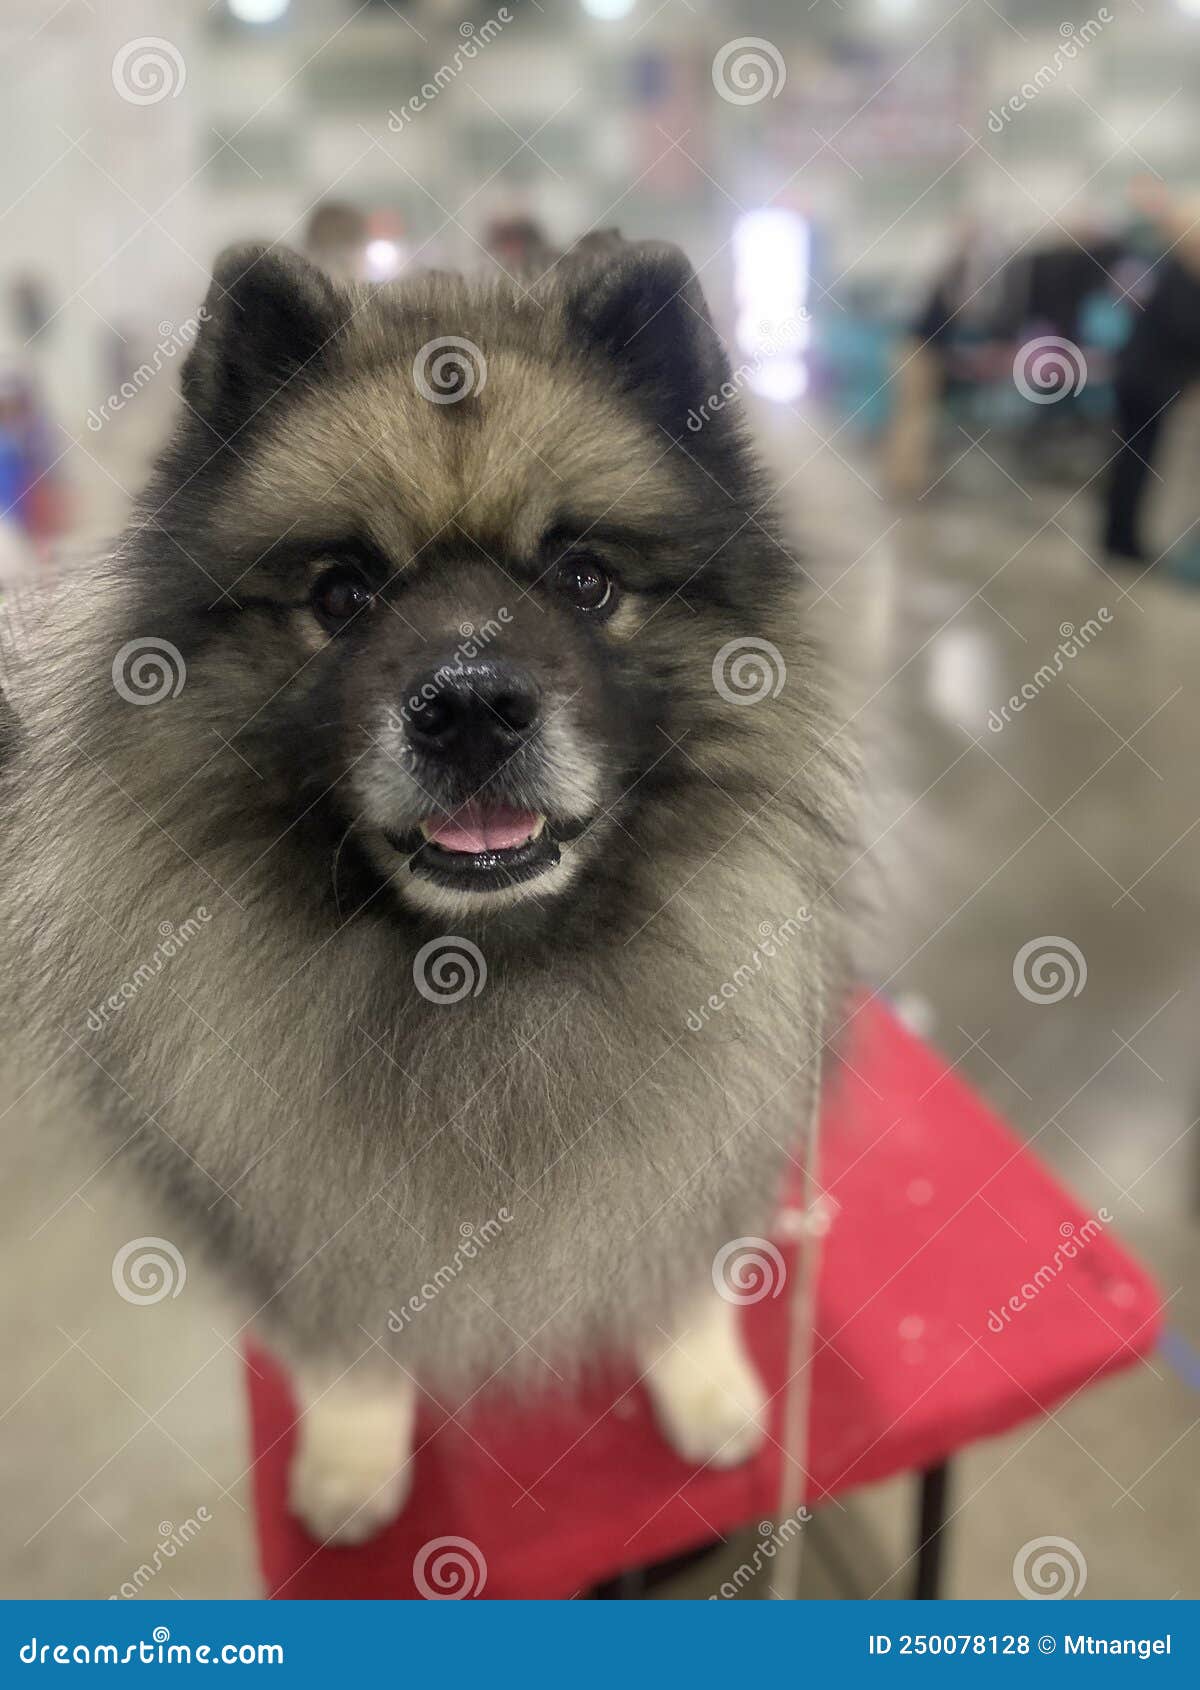 perky keeshond on top of grooming table